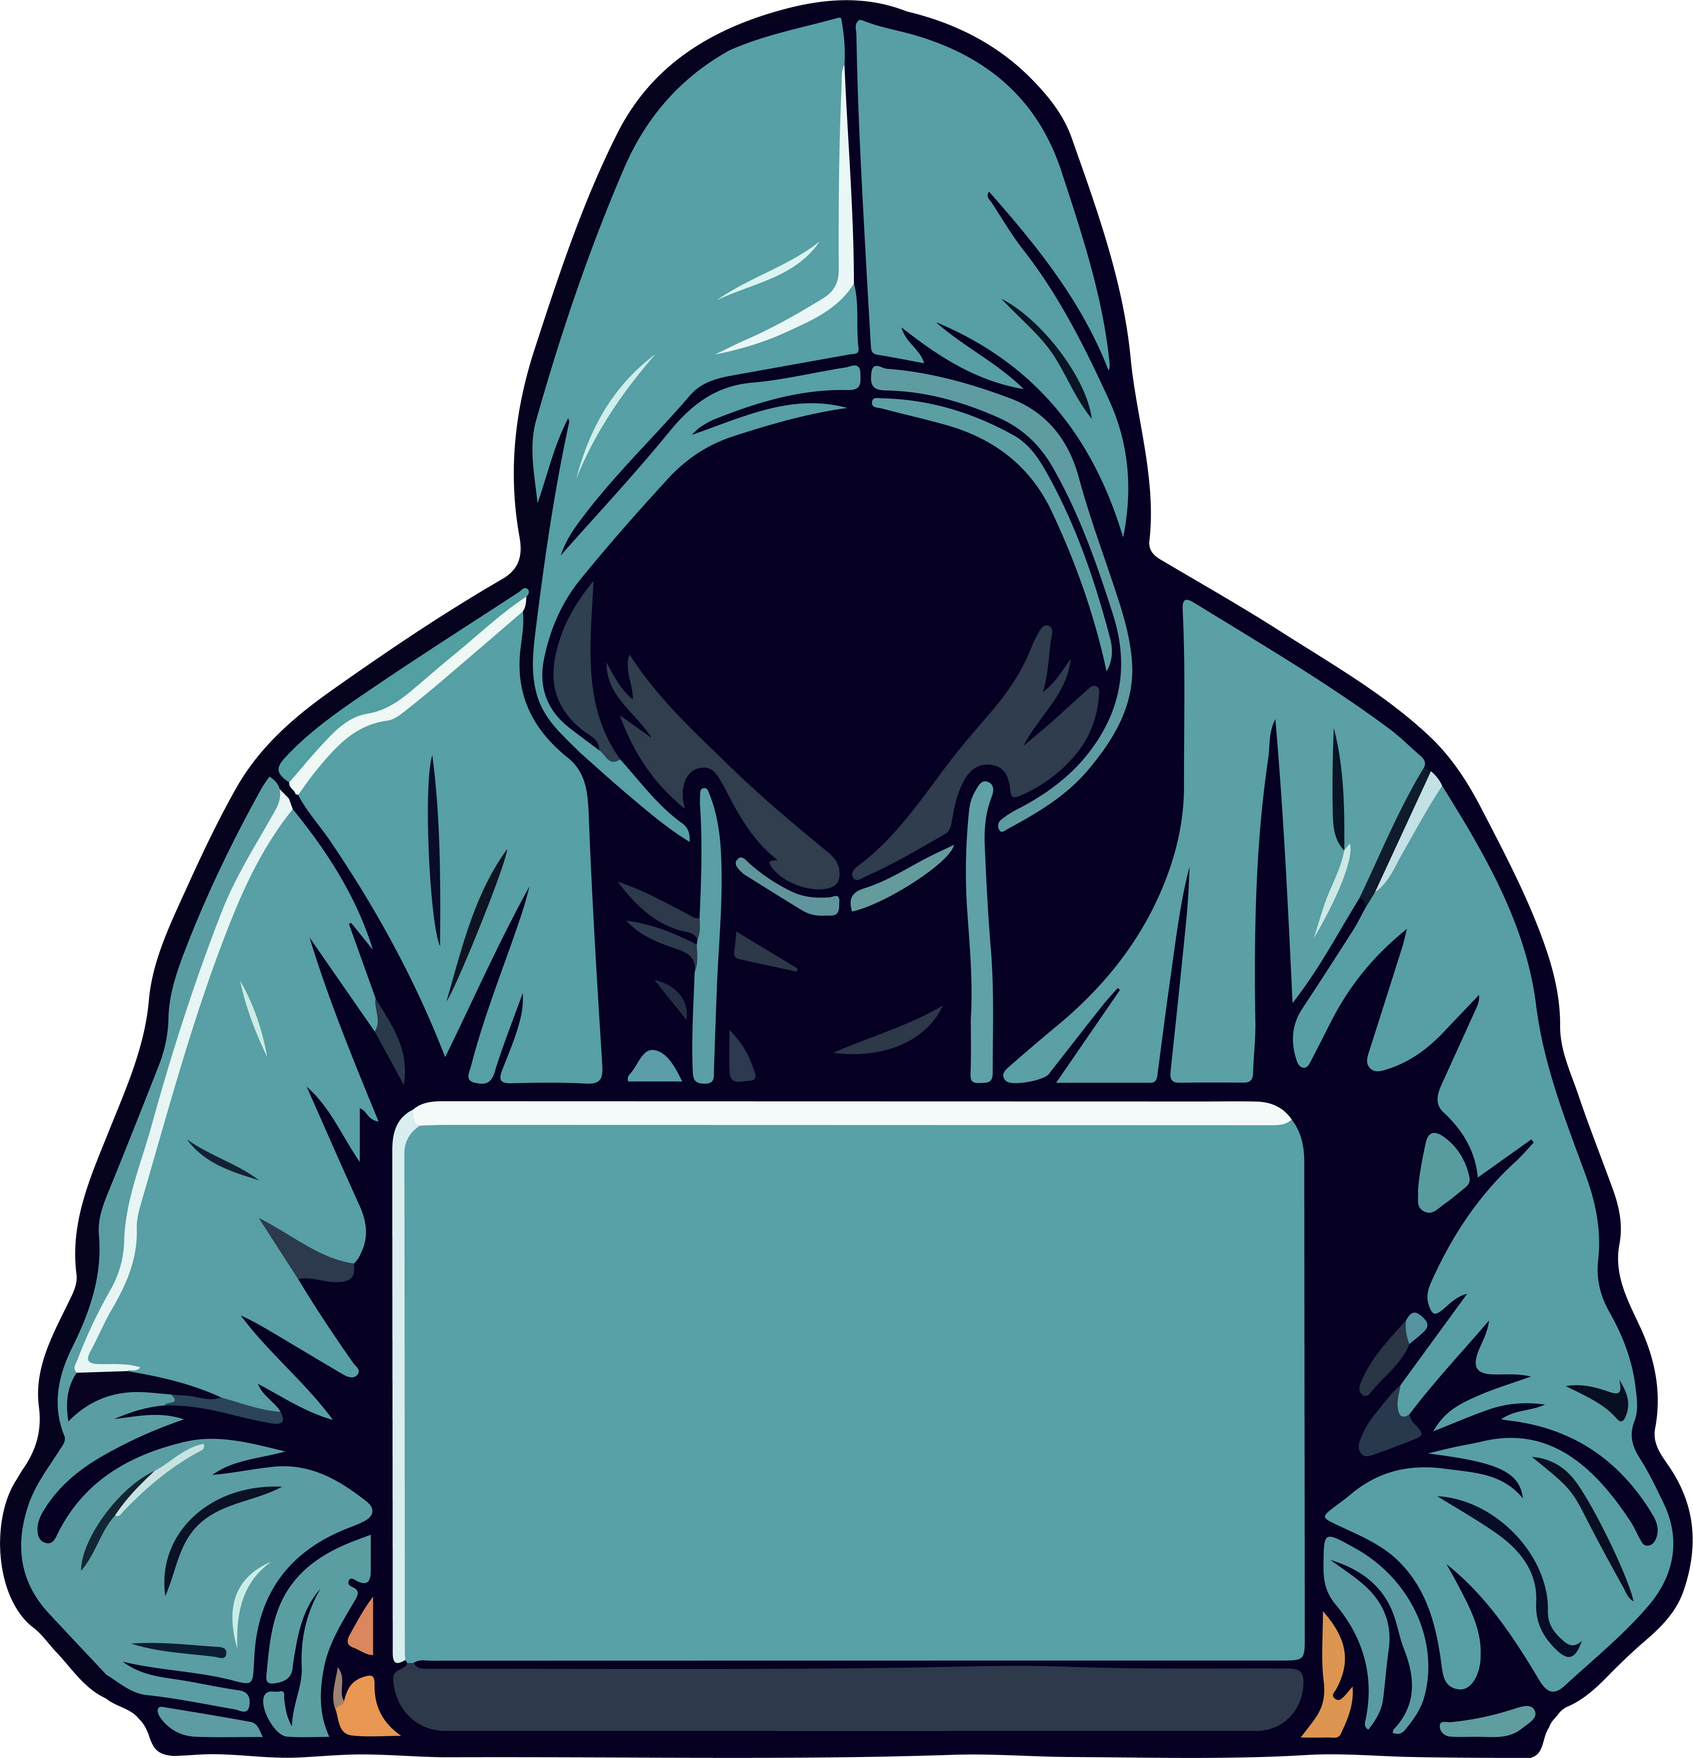 Hacker with laptop character